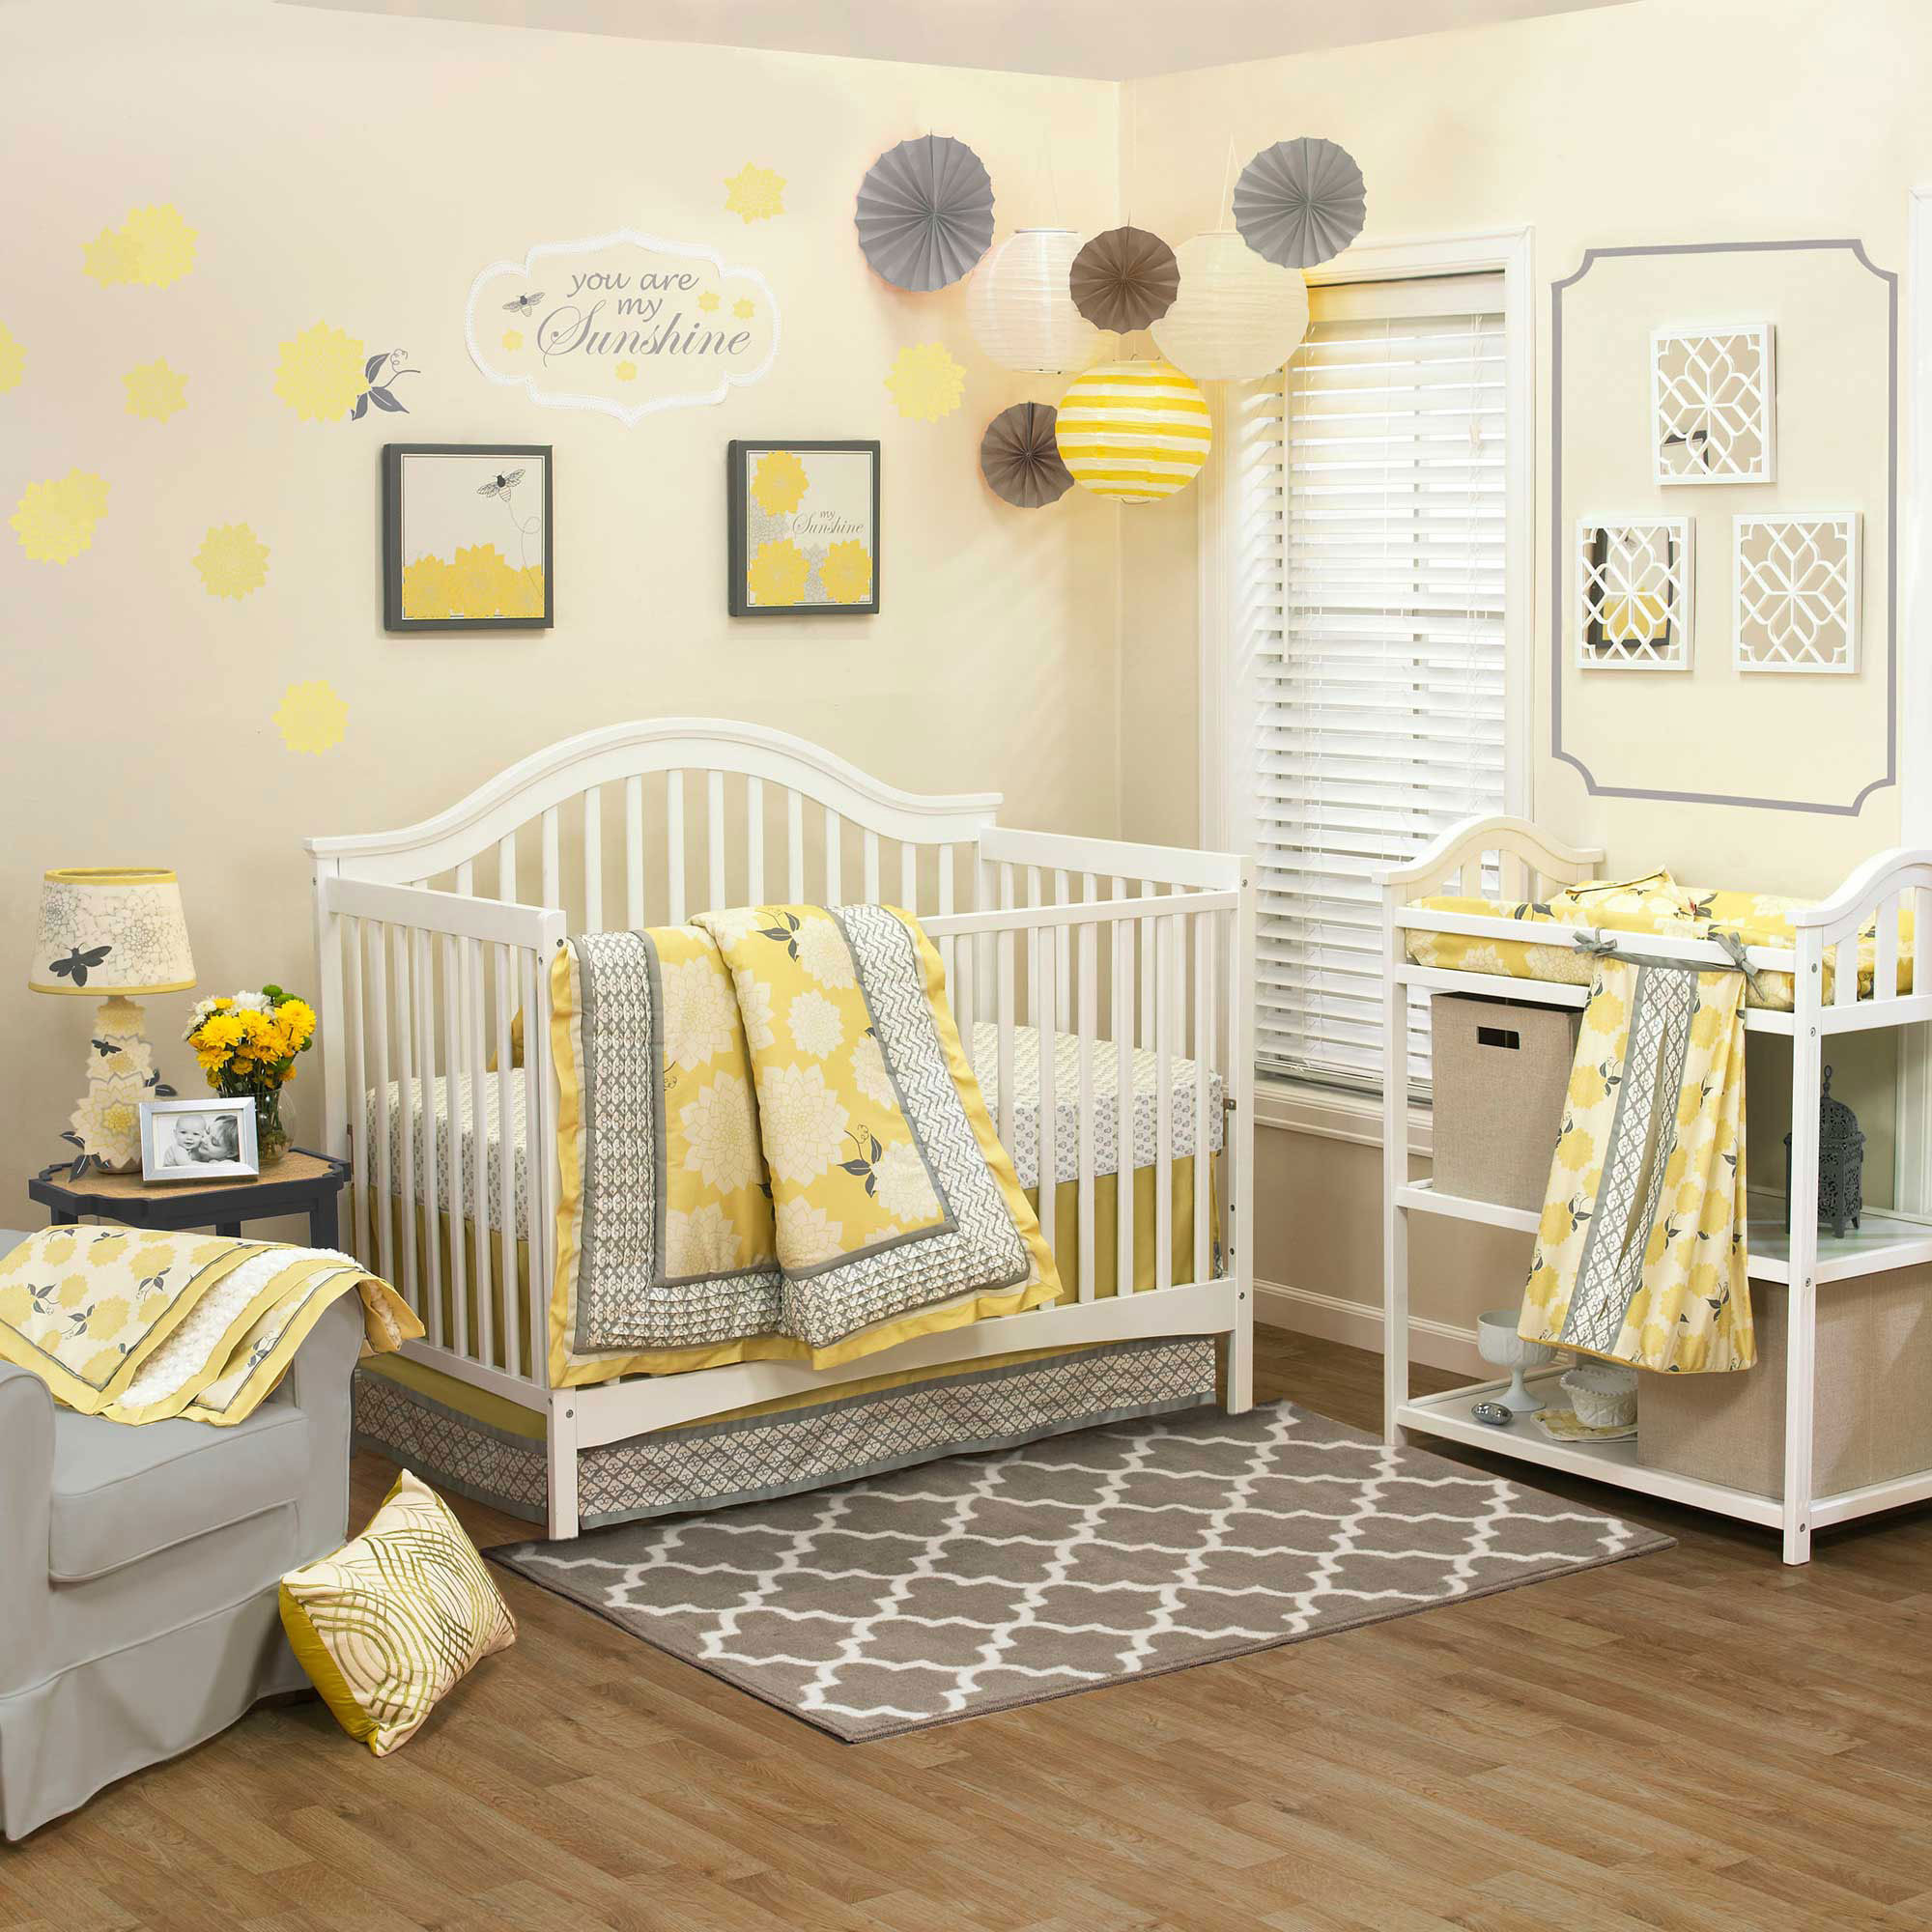 Baby Girl Decorations For Room
 Baby Girl Nursery Ideas 10 Pretty Examples Decorating Room